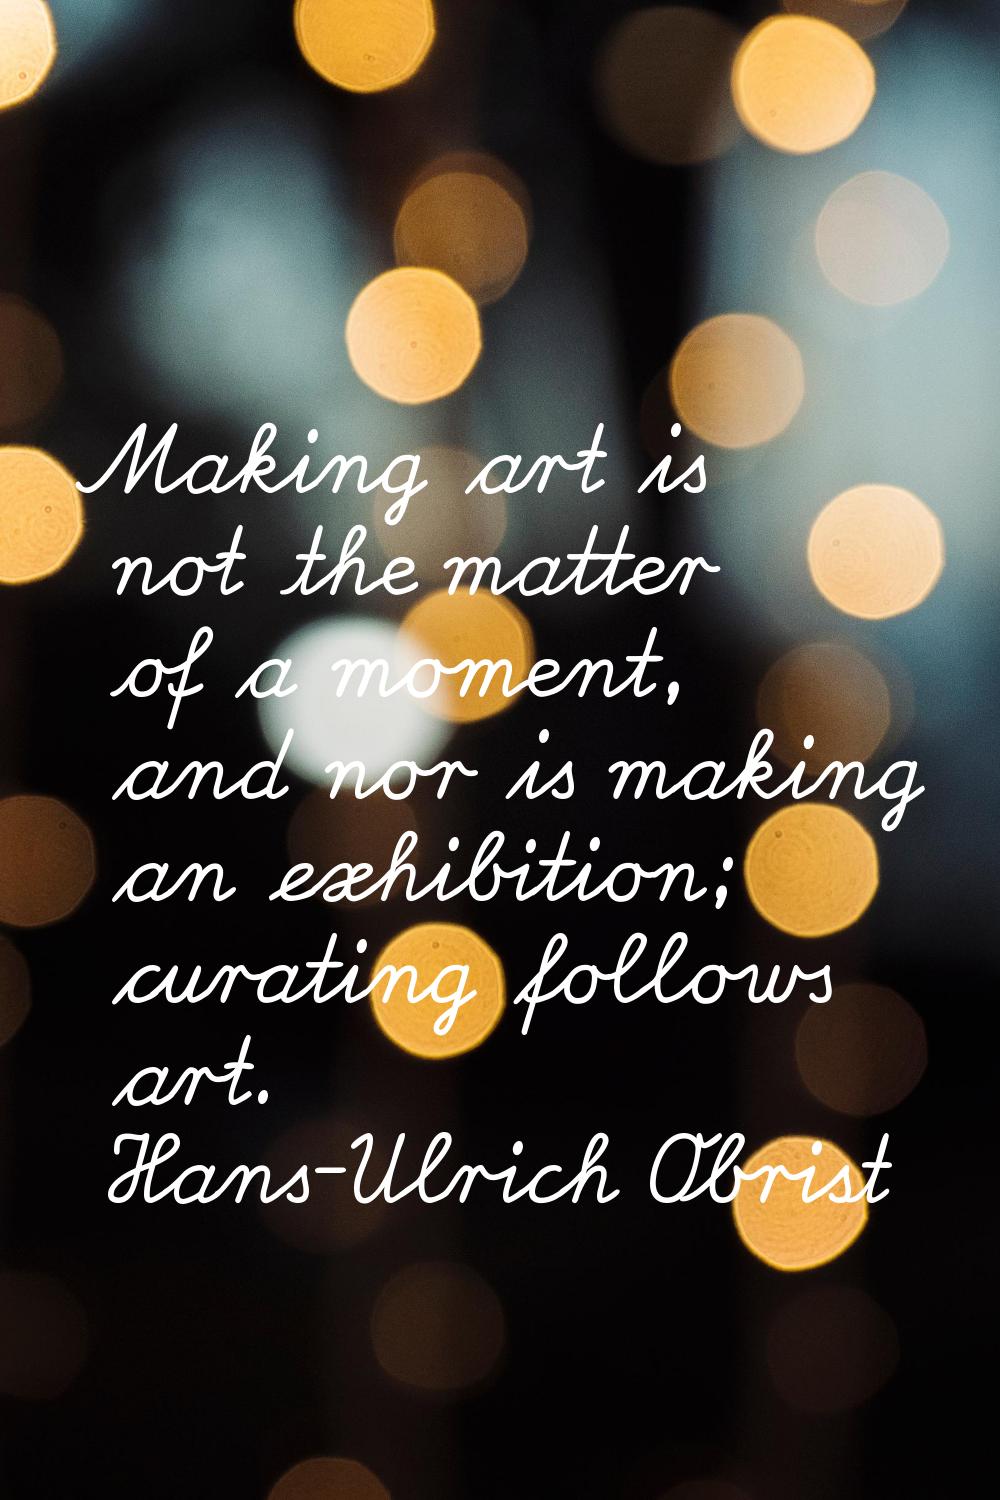 Making art is not the matter of a moment, and nor is making an exhibition; curating follows art.